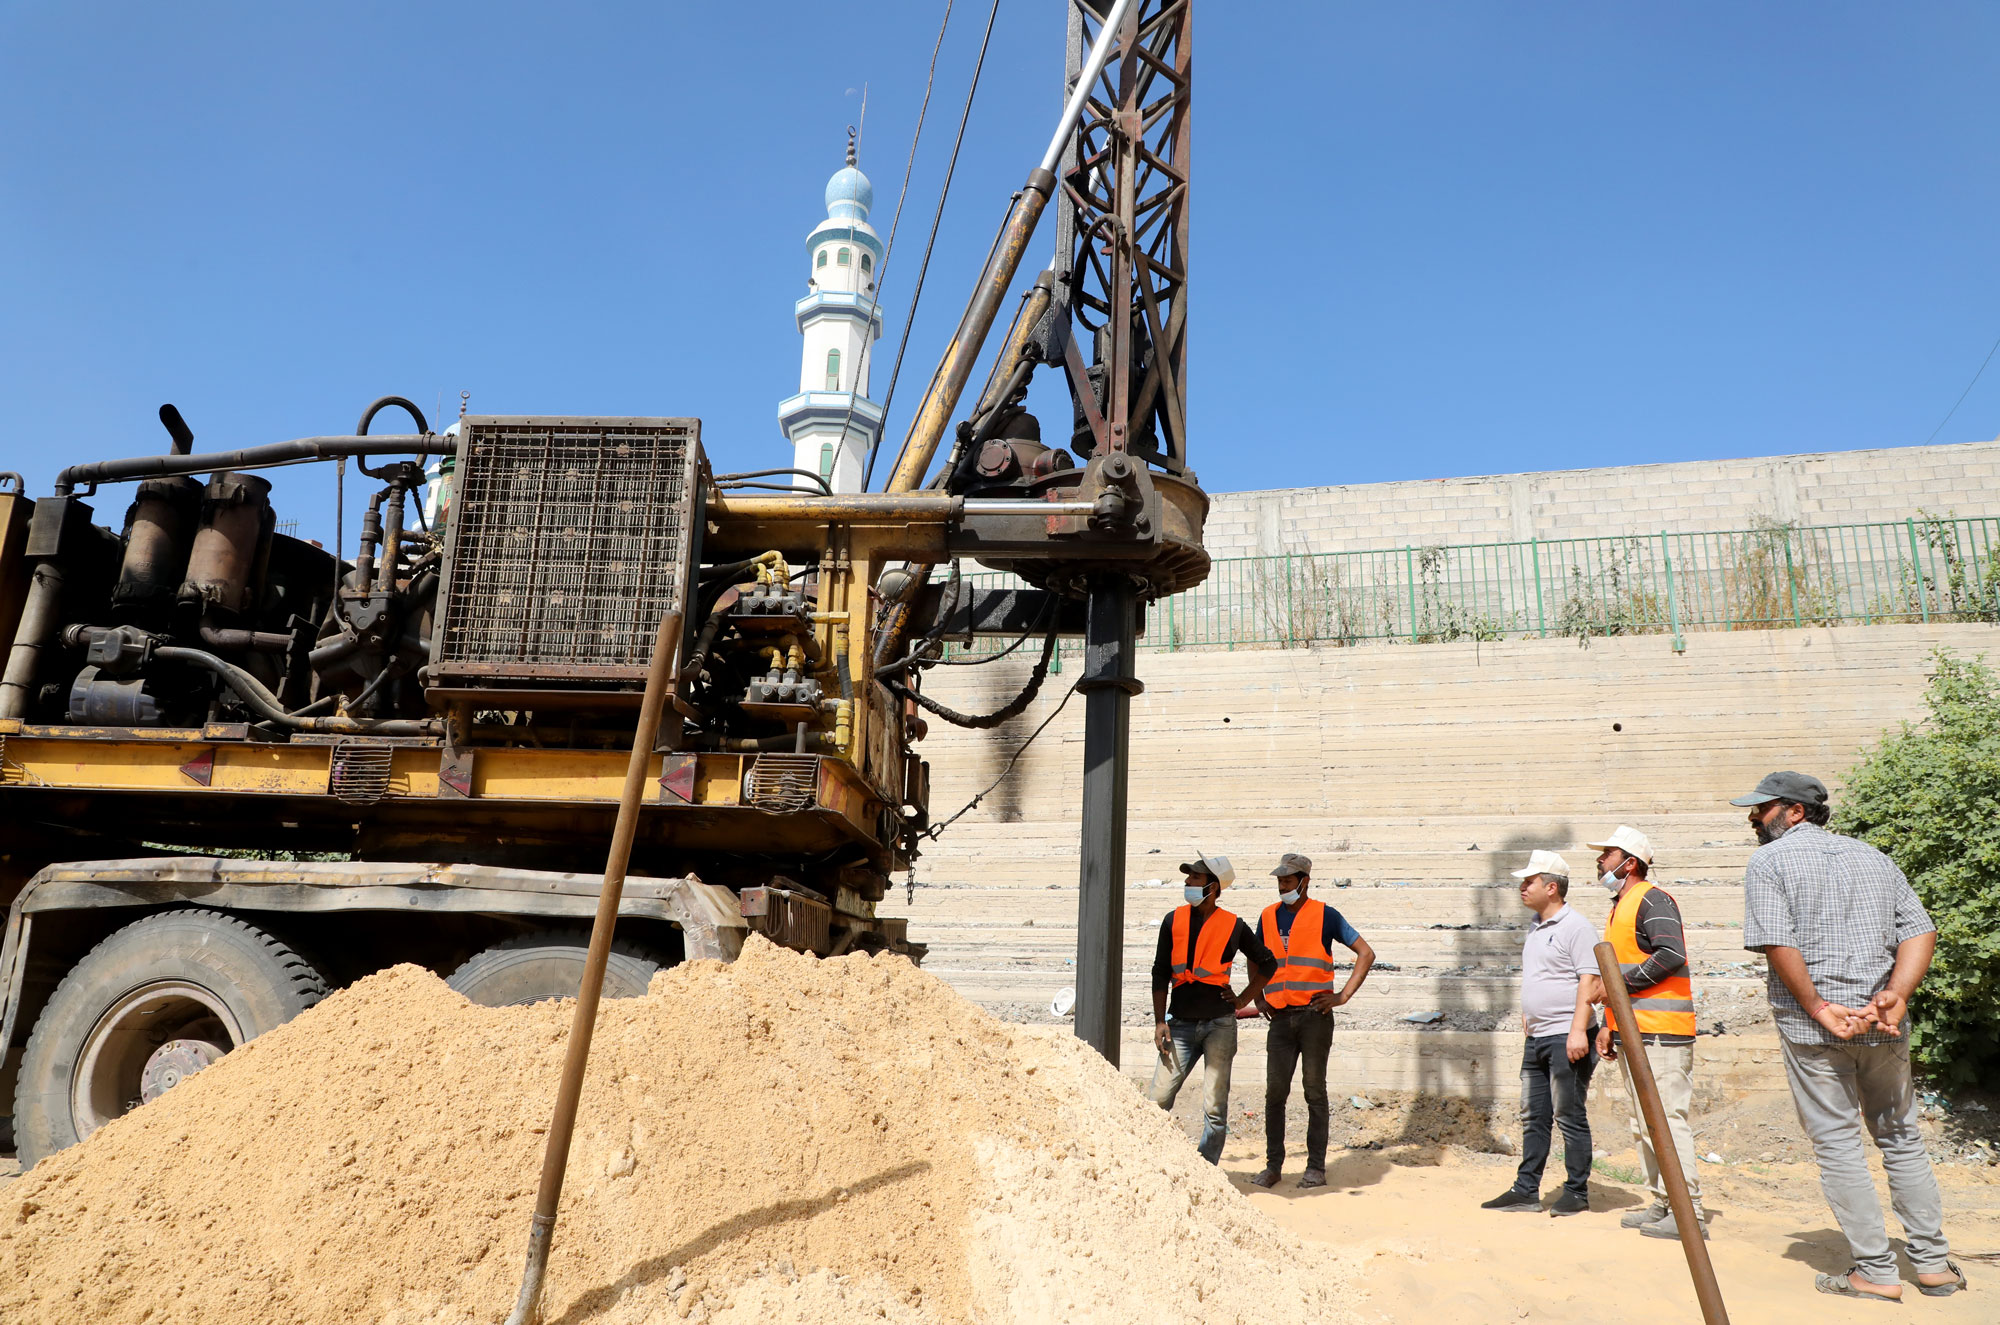 Construction equipment in the Asqula Stormwater Basin in Gaza City.